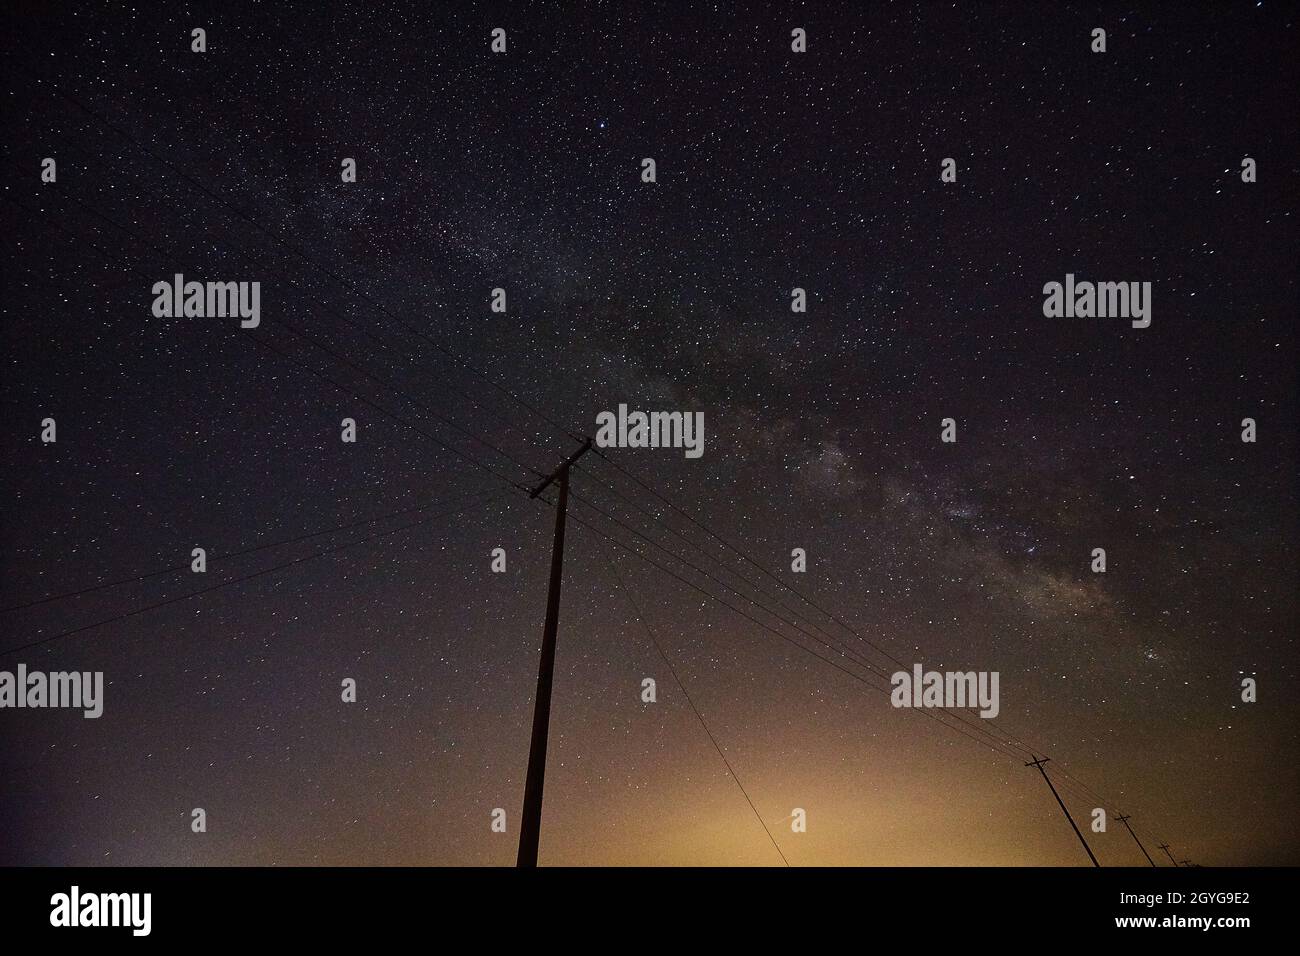 City glow with a stary night sky and the silhouette of telephone poles Stock Photo